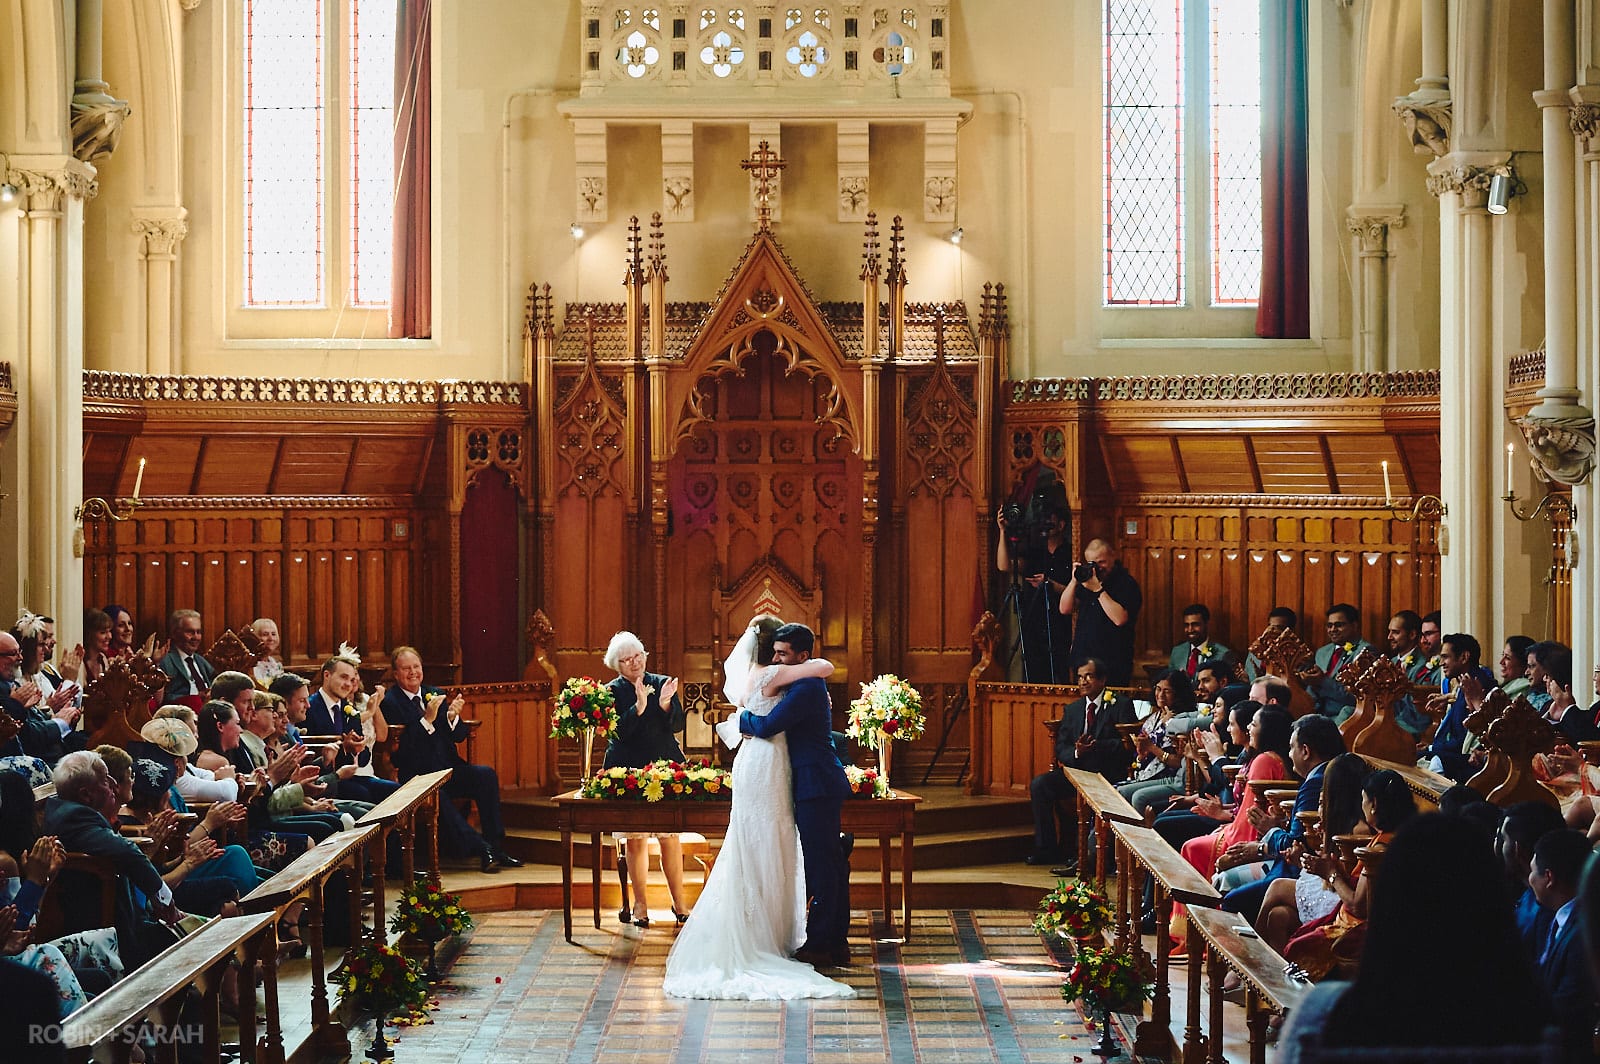 Bride and groom hug at end of wedding ceremony in Callow Great Hall at Stanbrook Abbey